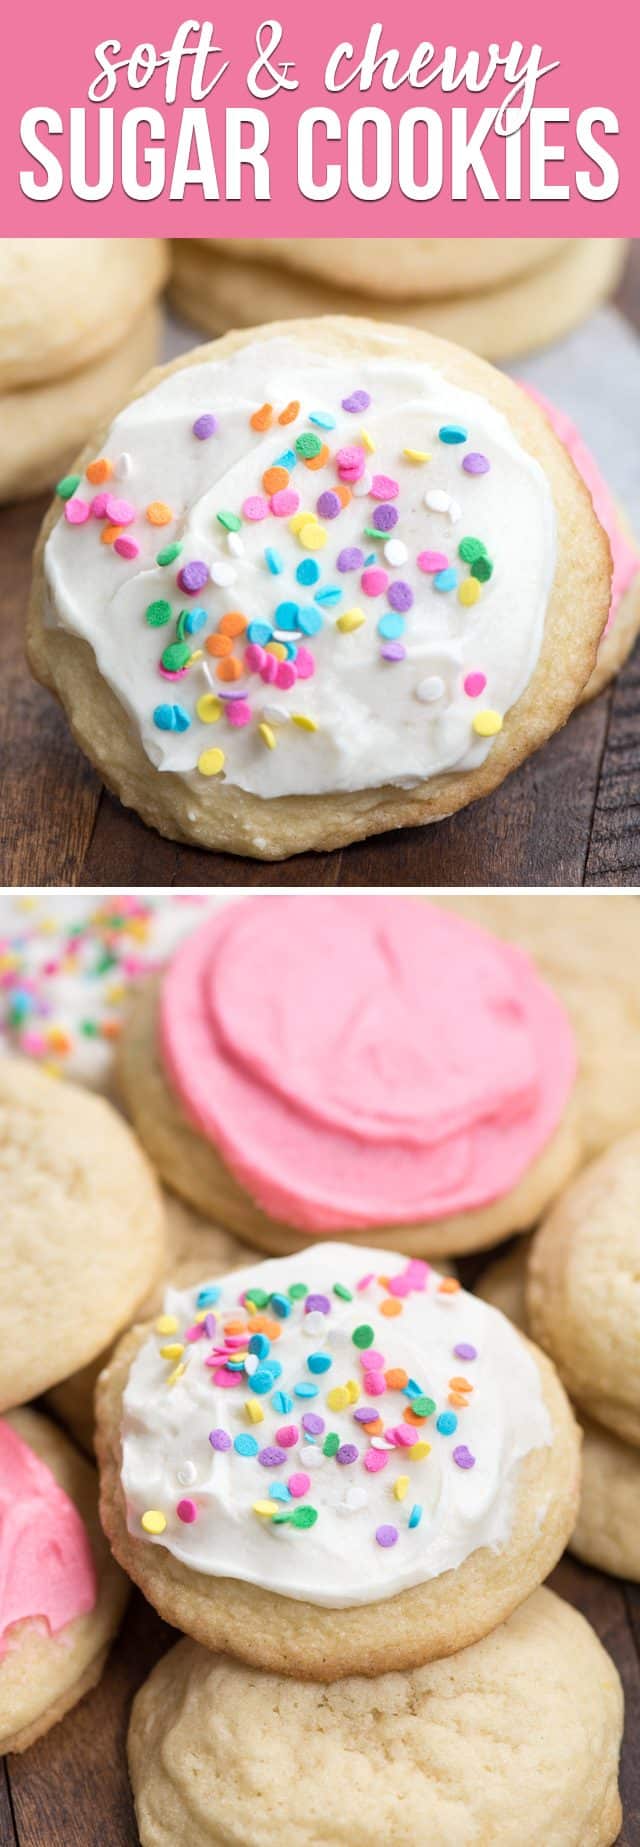 collage of sugar cookie recipes